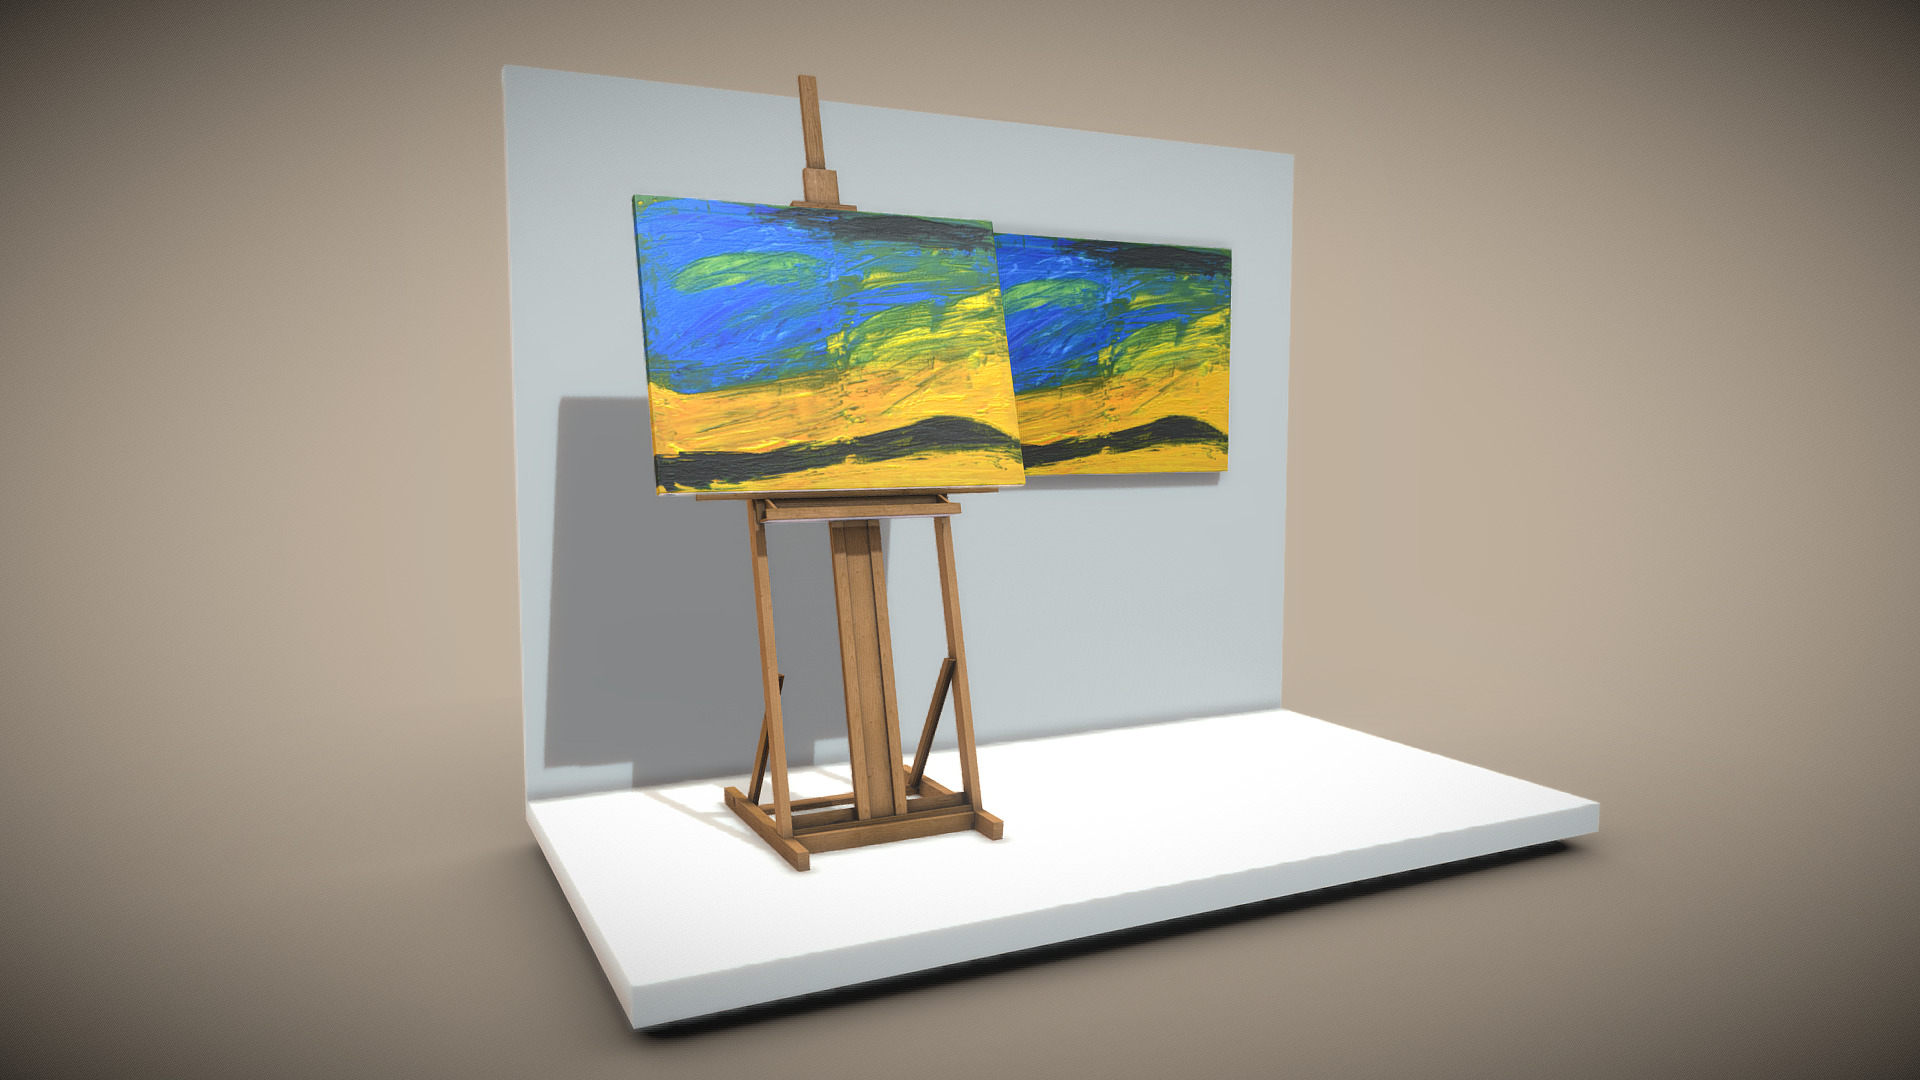 3D model Landscape – Oil Painting - This is a 3D model of the Landscape - Oil Painting. The 3D model is about a painting on a stand.